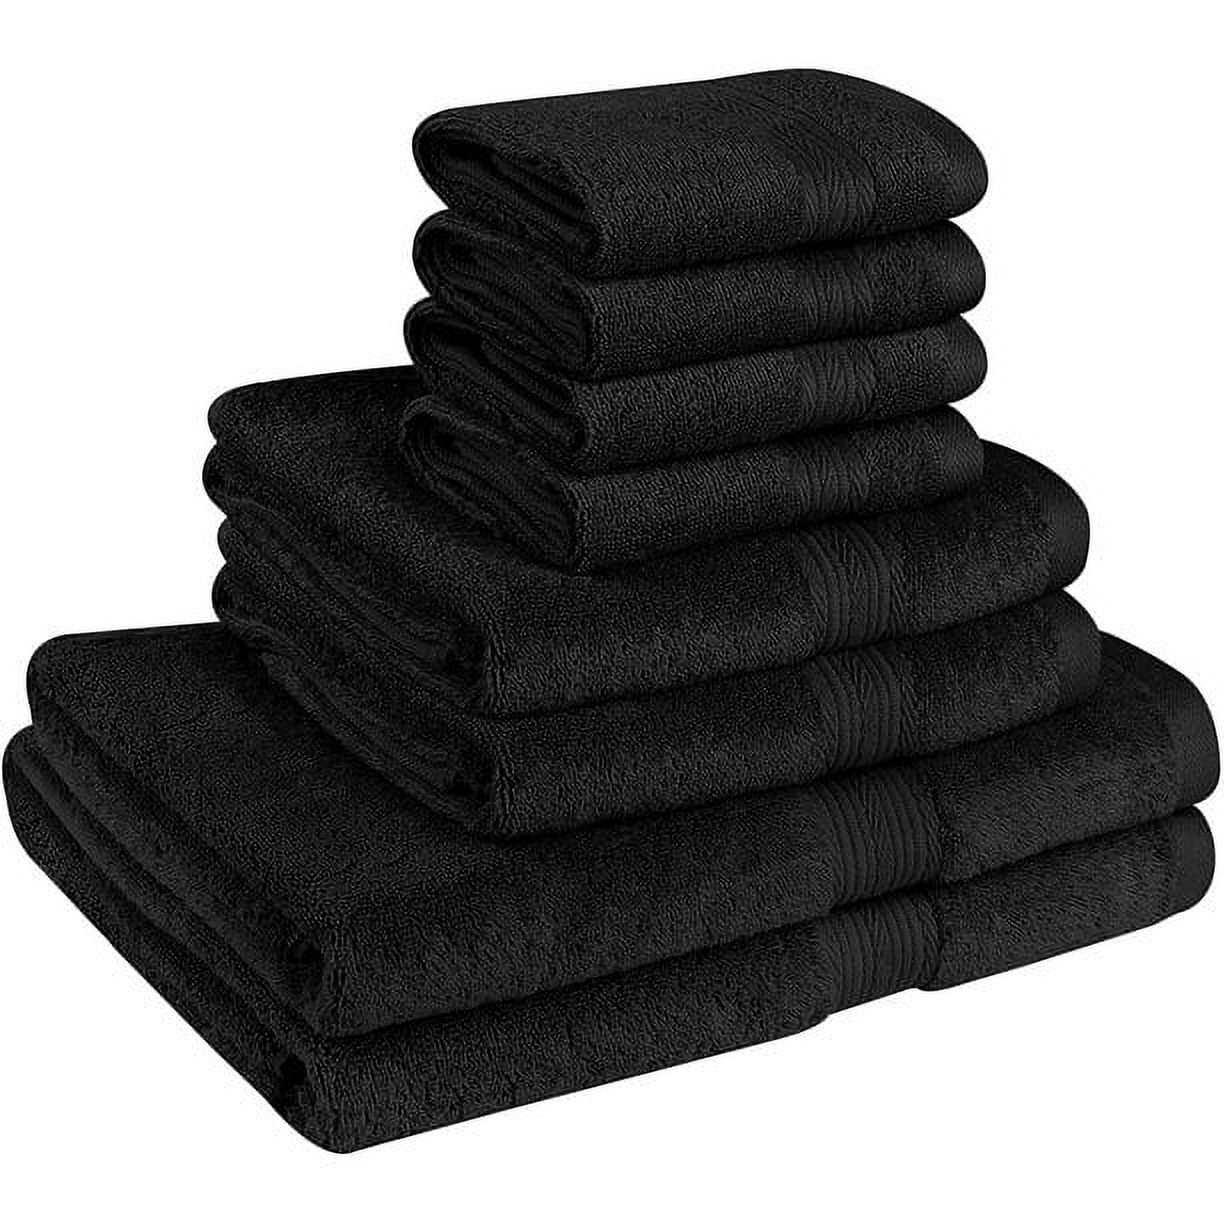 Beauty Threadz Ultra Soft 8 Piece Towel Set 500 GSM - 100% Pure Cotton, 2 Oversized Bath Towels 27x54, 2 Hand Towels 16x28, 4 Wash Cloths 13x13 - Ideal for Everyday use, Hotel & Spa- Black - image 1 of 7